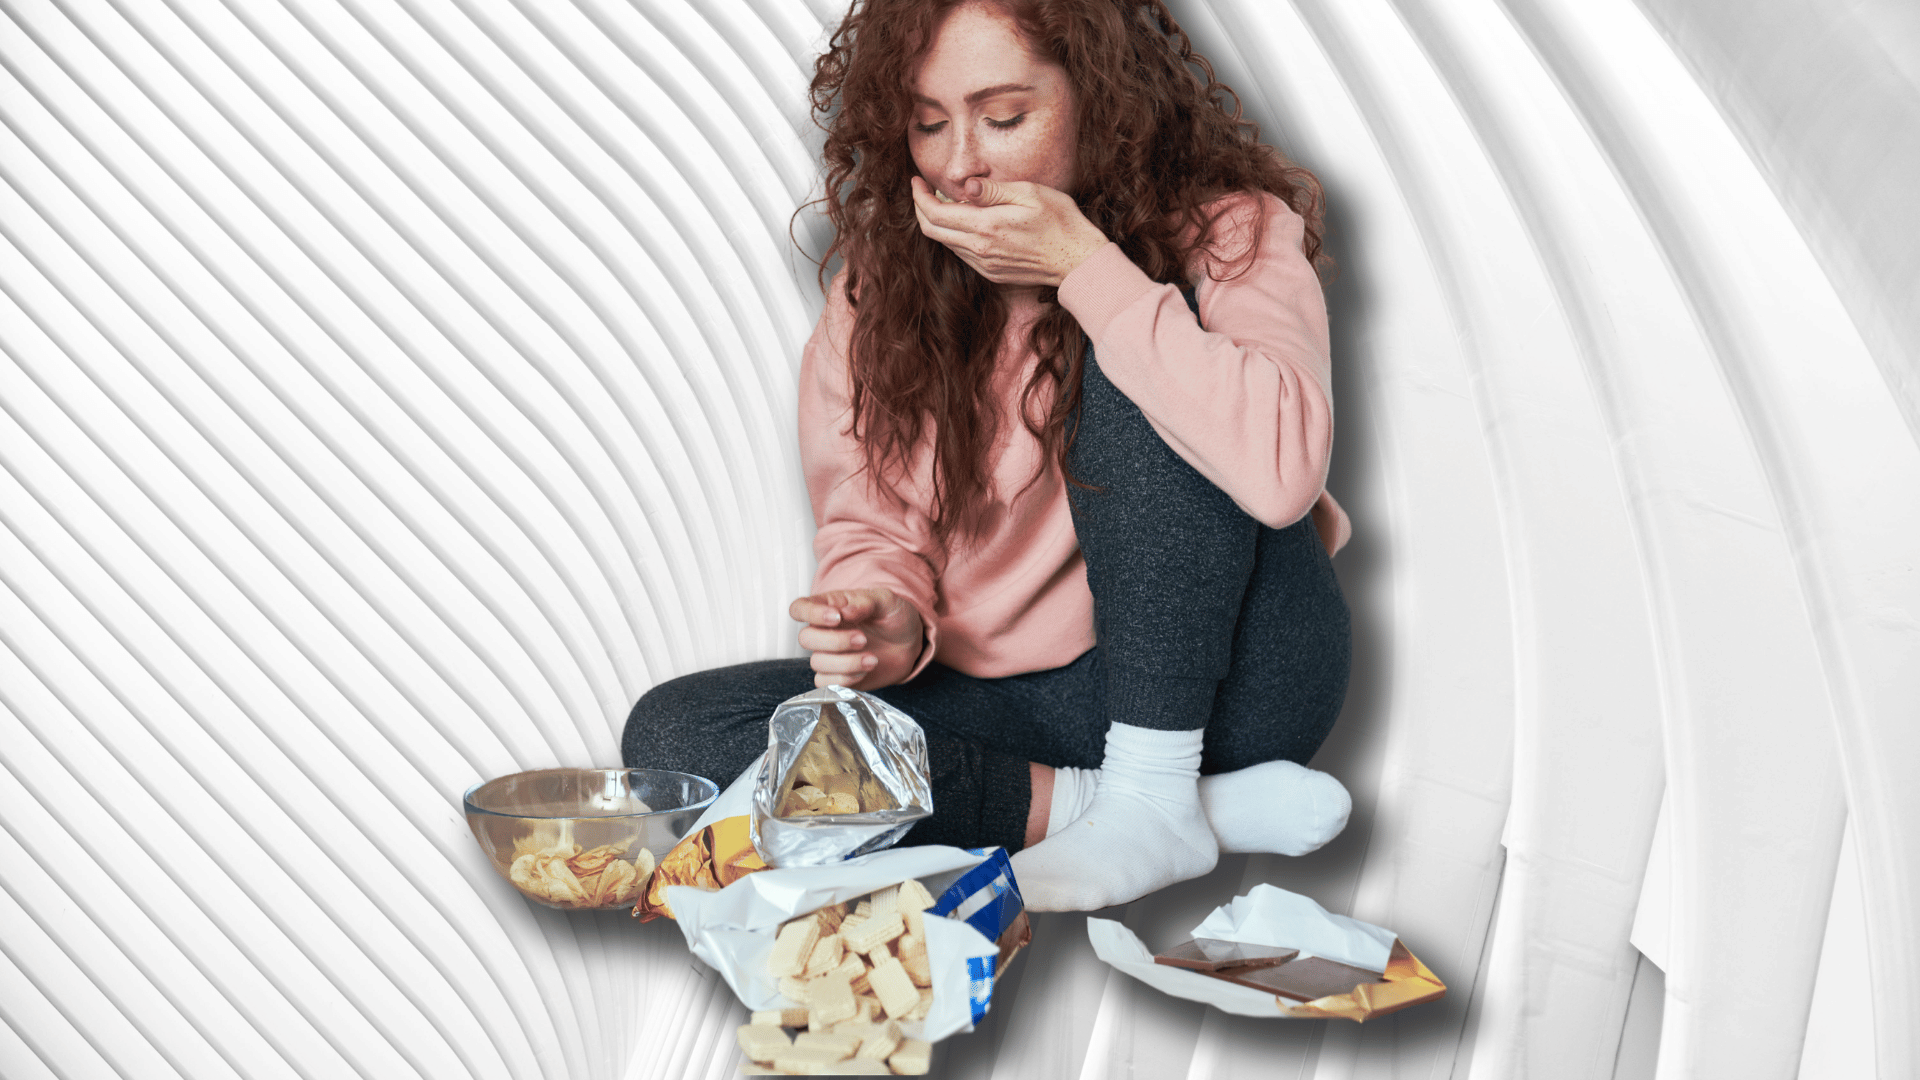 A woman sitting on a floor stuffing food into her mouth from plates of food that surround her